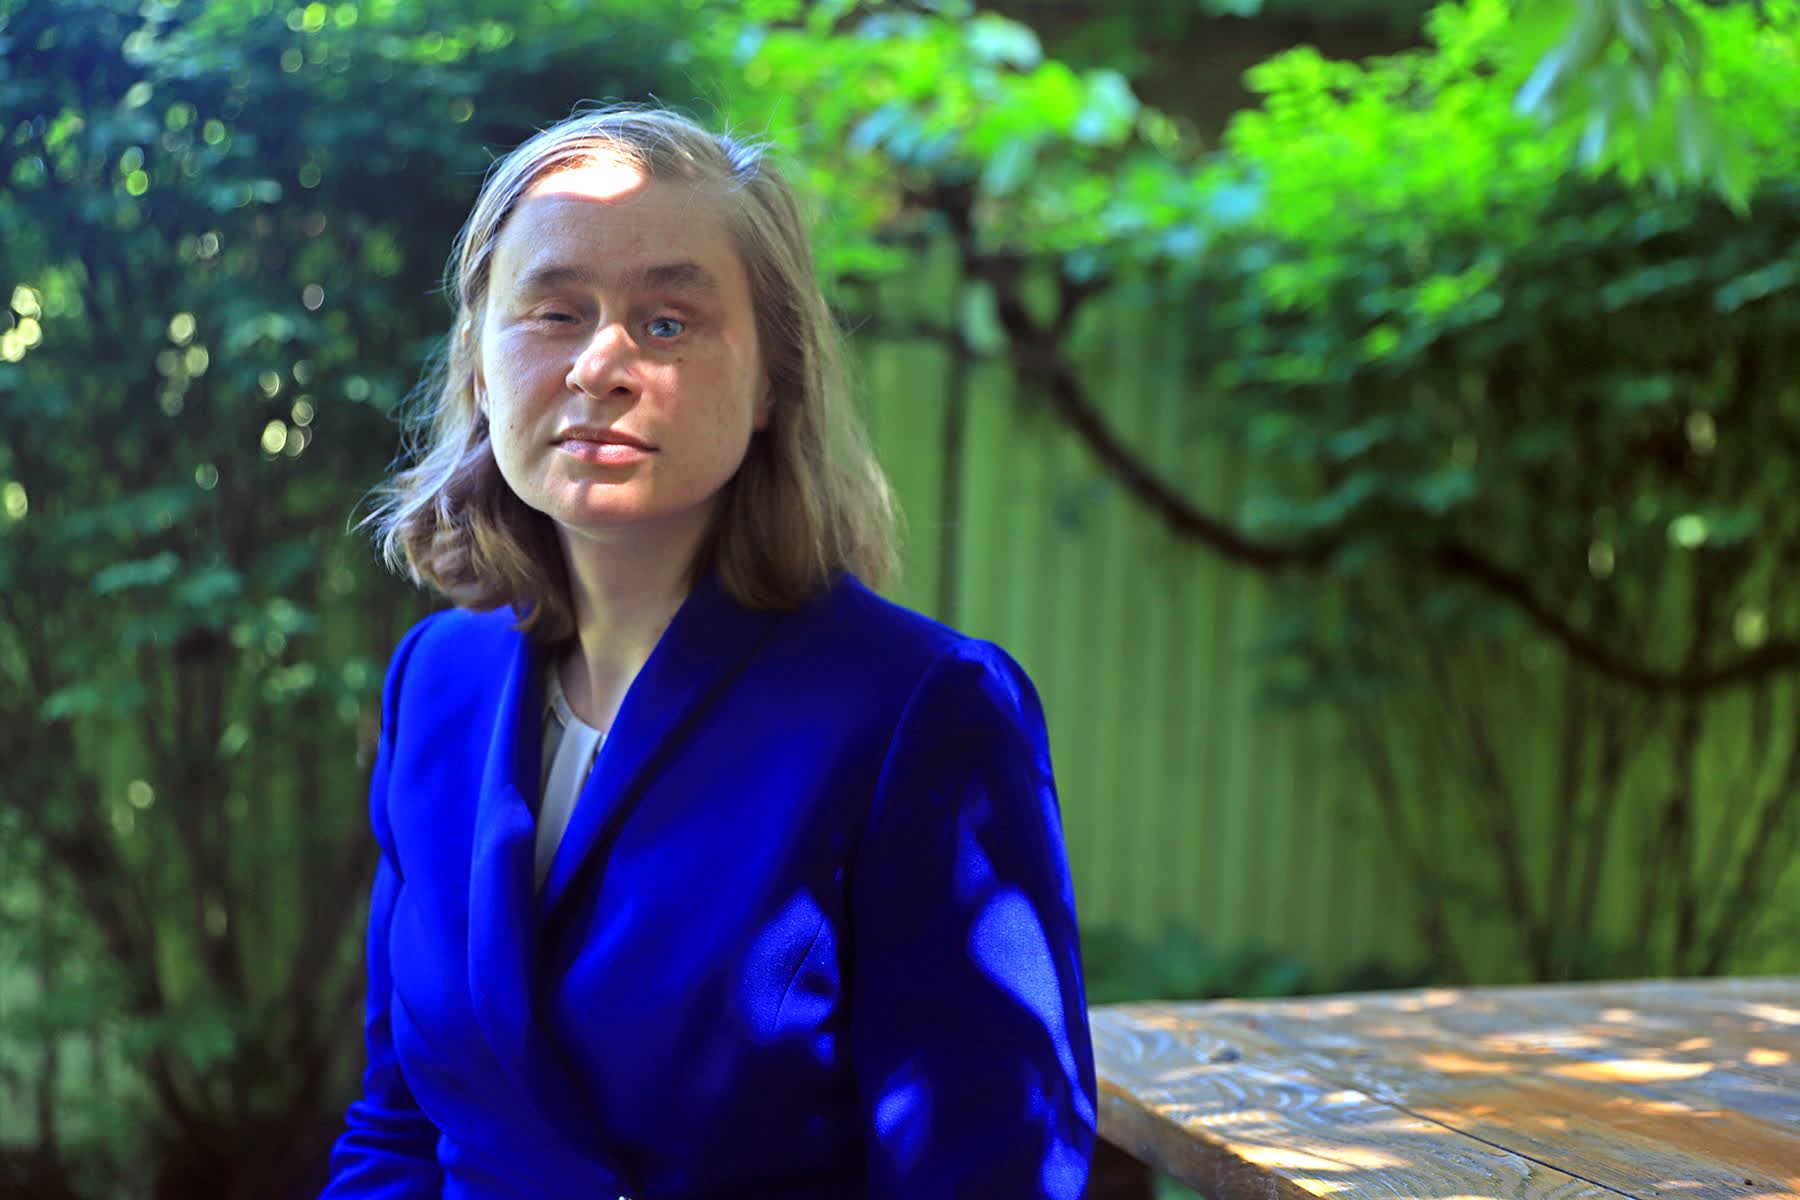 Close up photograph of essay author Catherine Getchell, a blind woman wearing a blue blazer. She’s sitting at a wooden picnic table in her backyard. There’s greenery in the background.